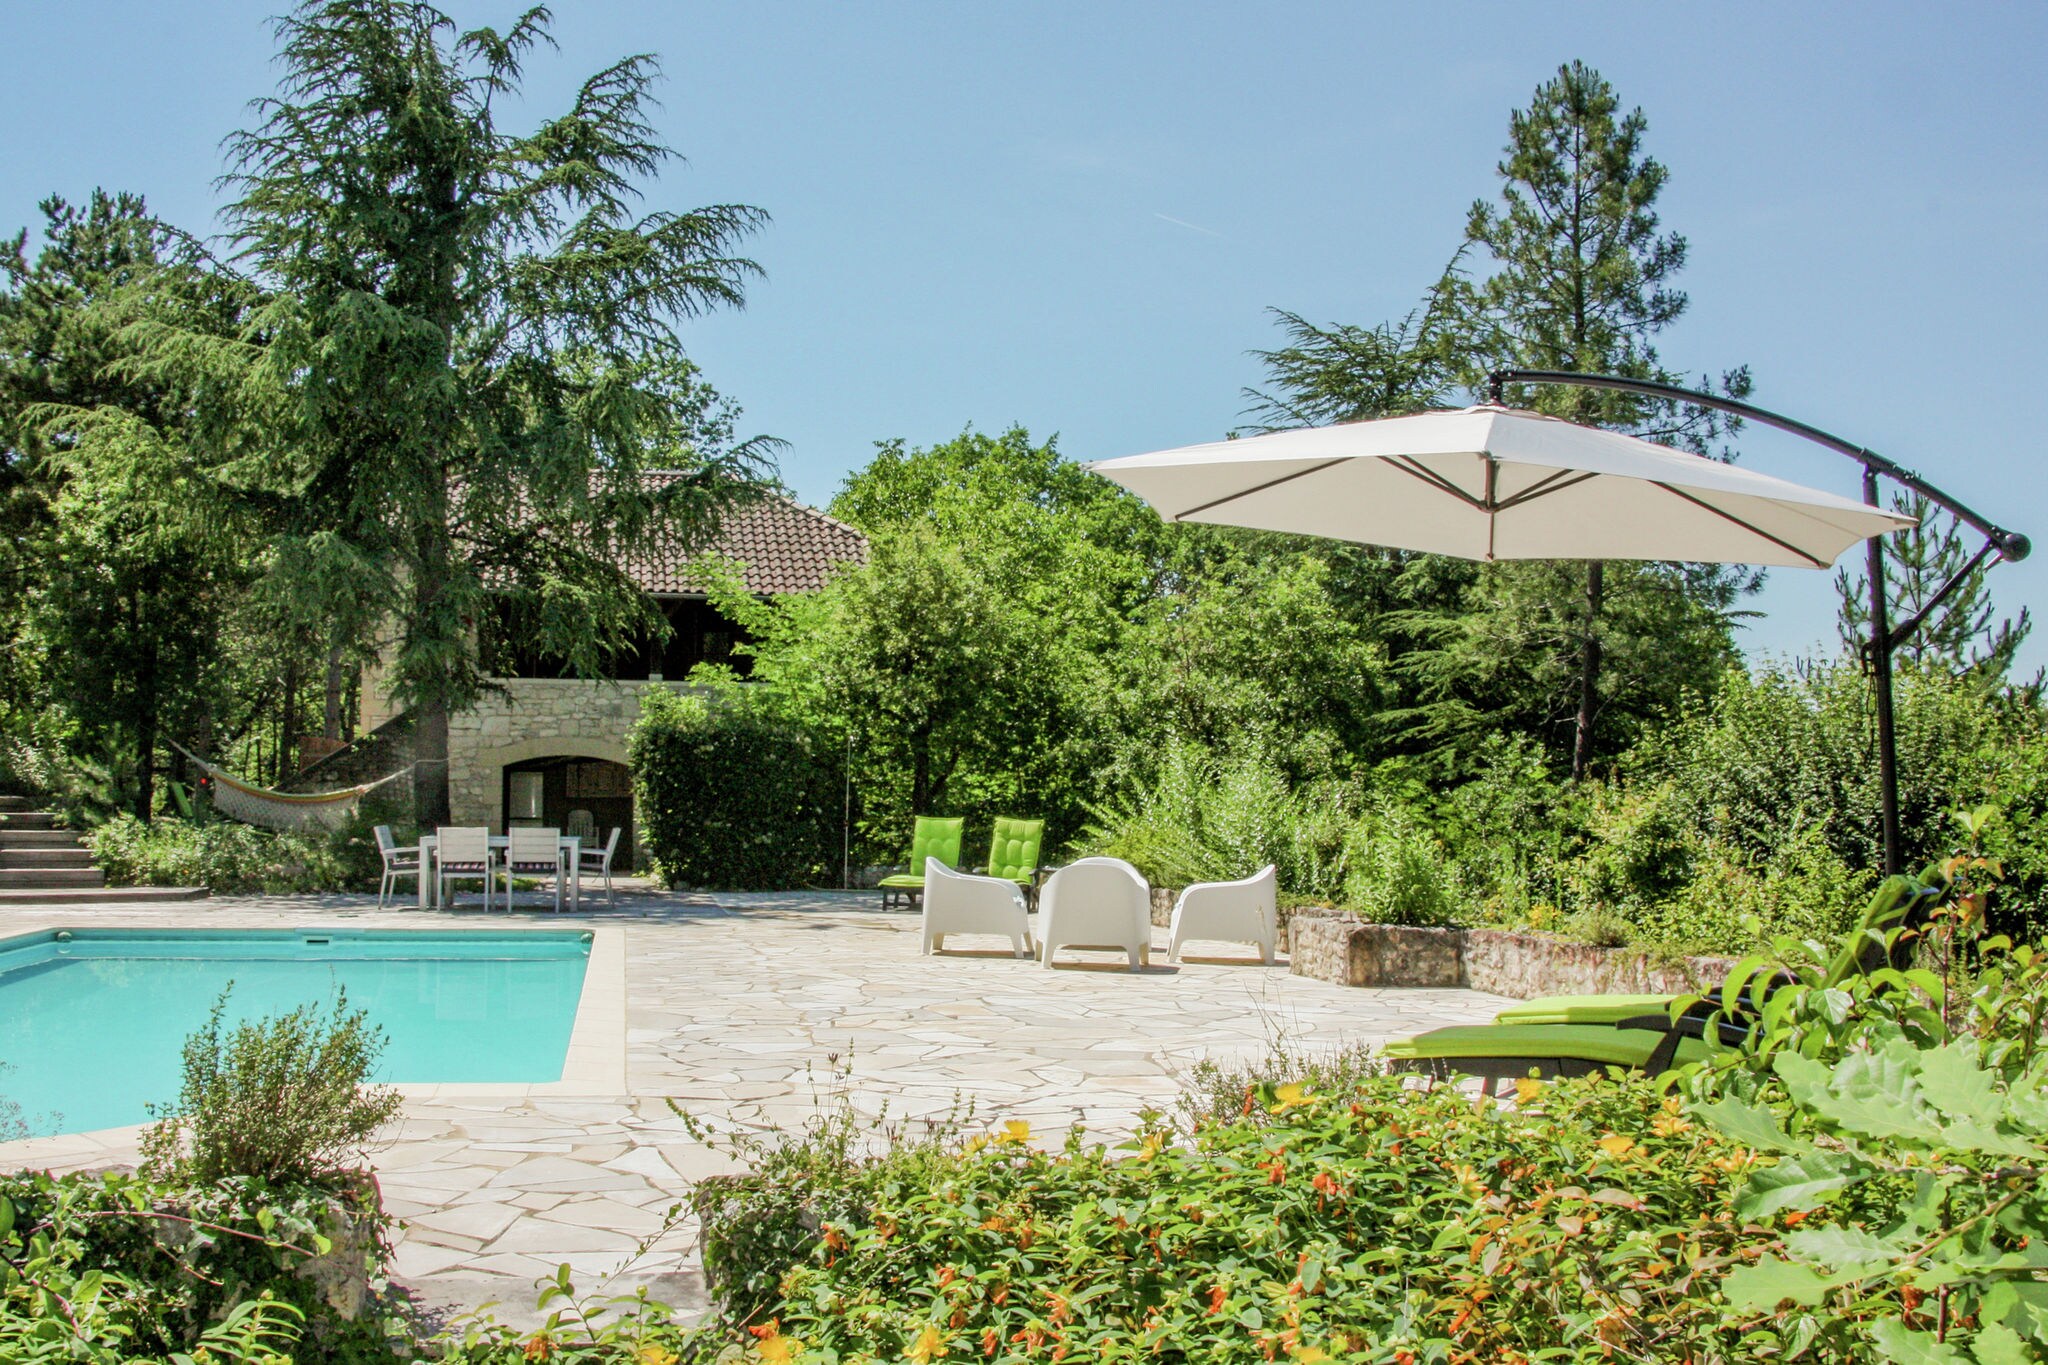 Gite with private swimming pool in wonderful, peaceful setting